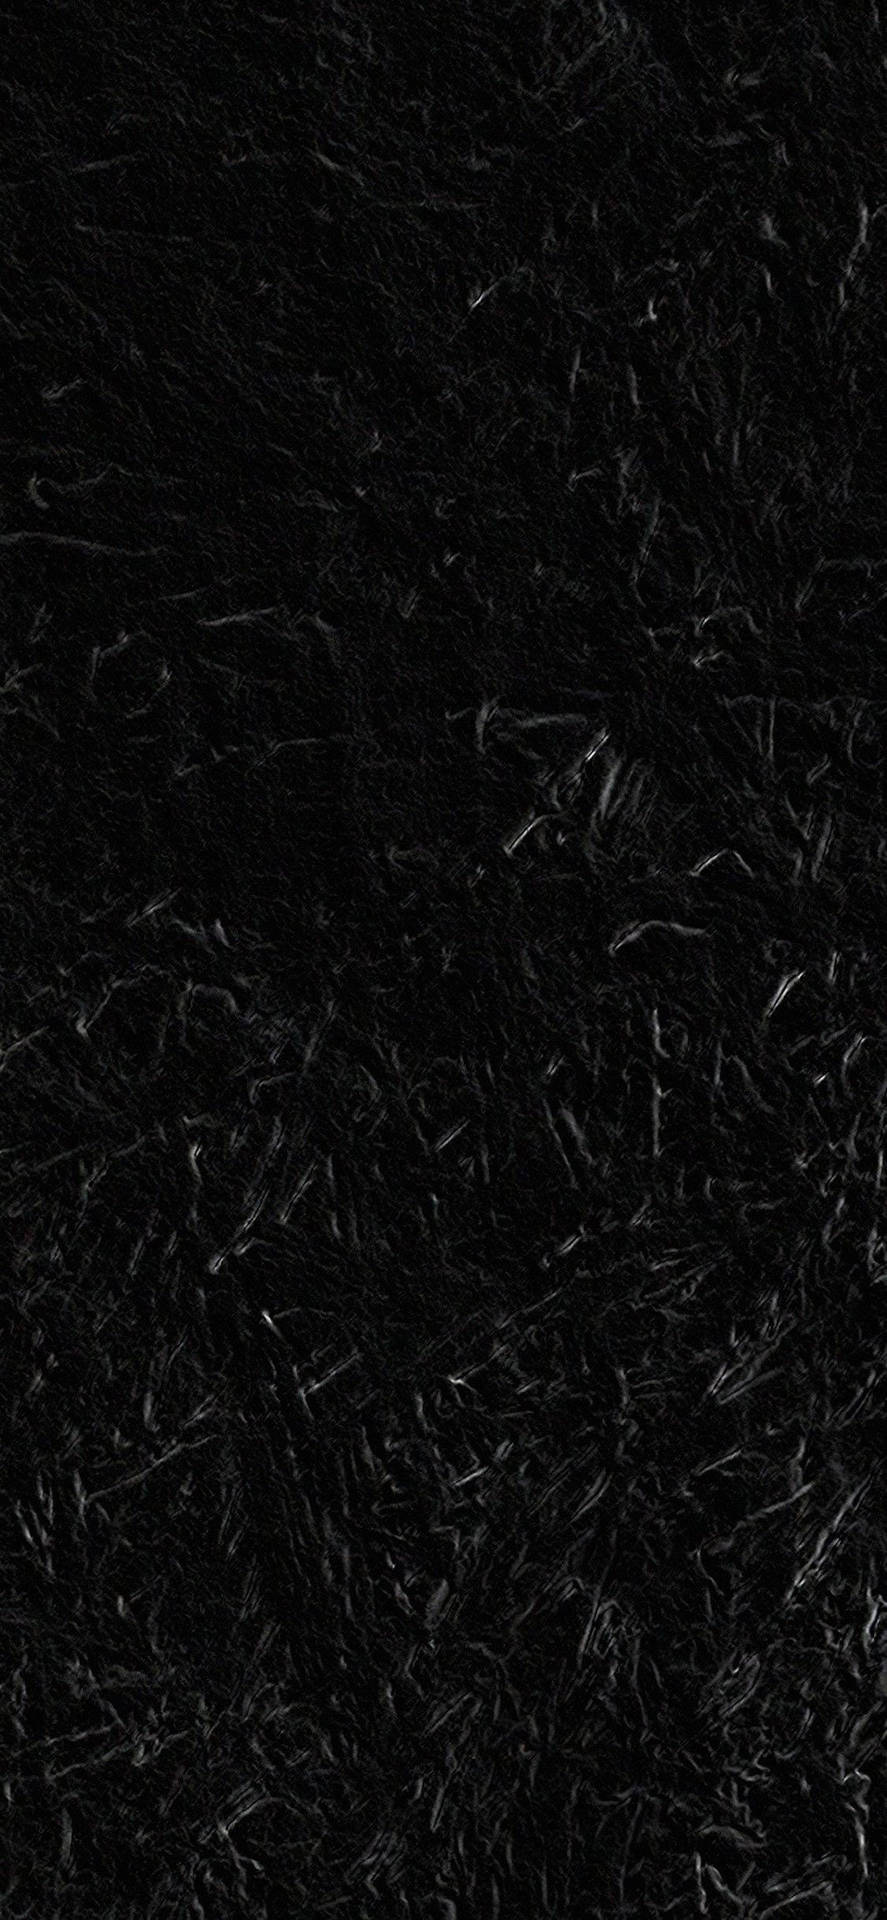 Textured Total Black Abstract Wallpaper